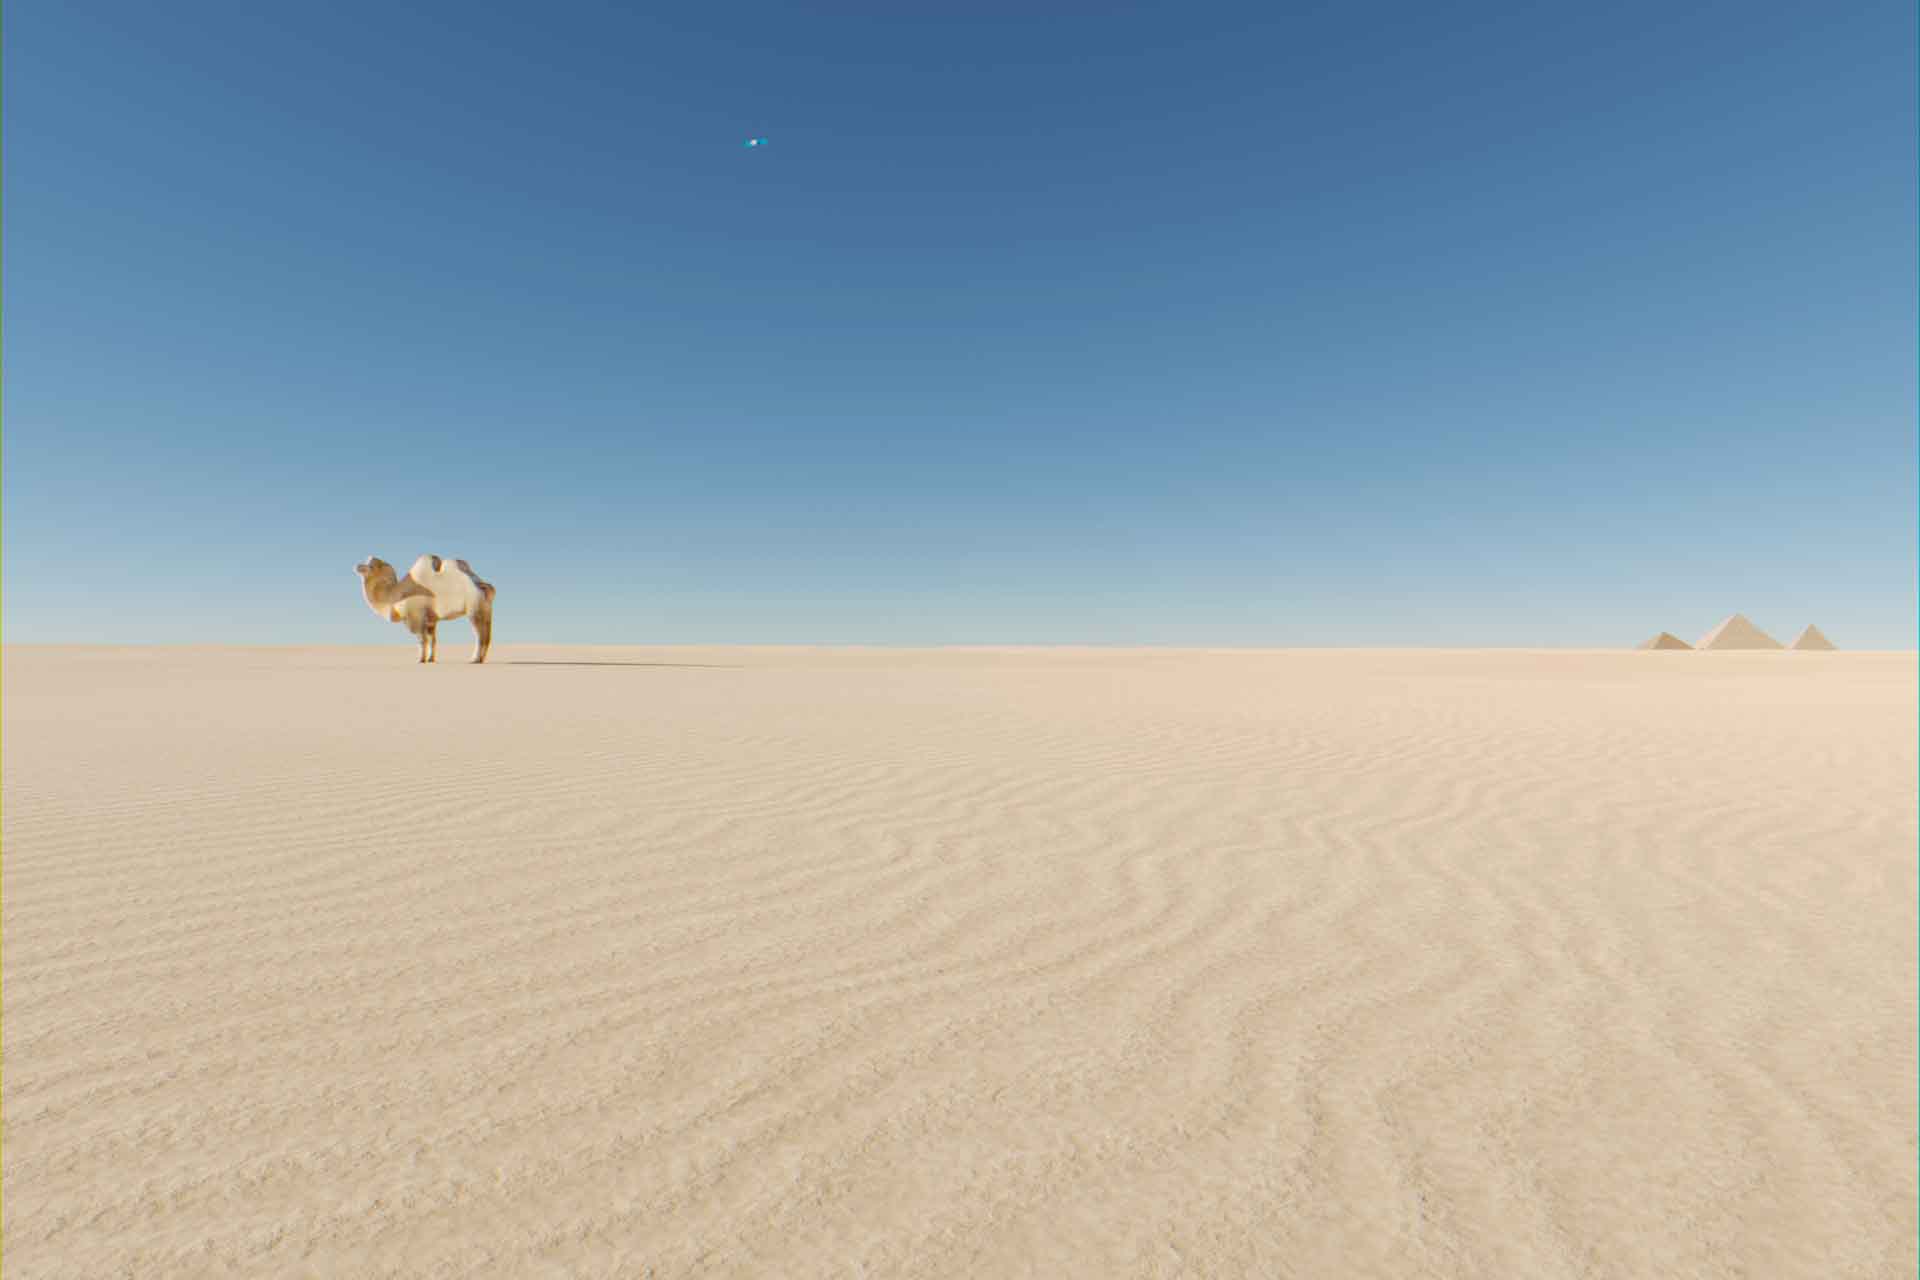 CG camel and pyramids with satellite